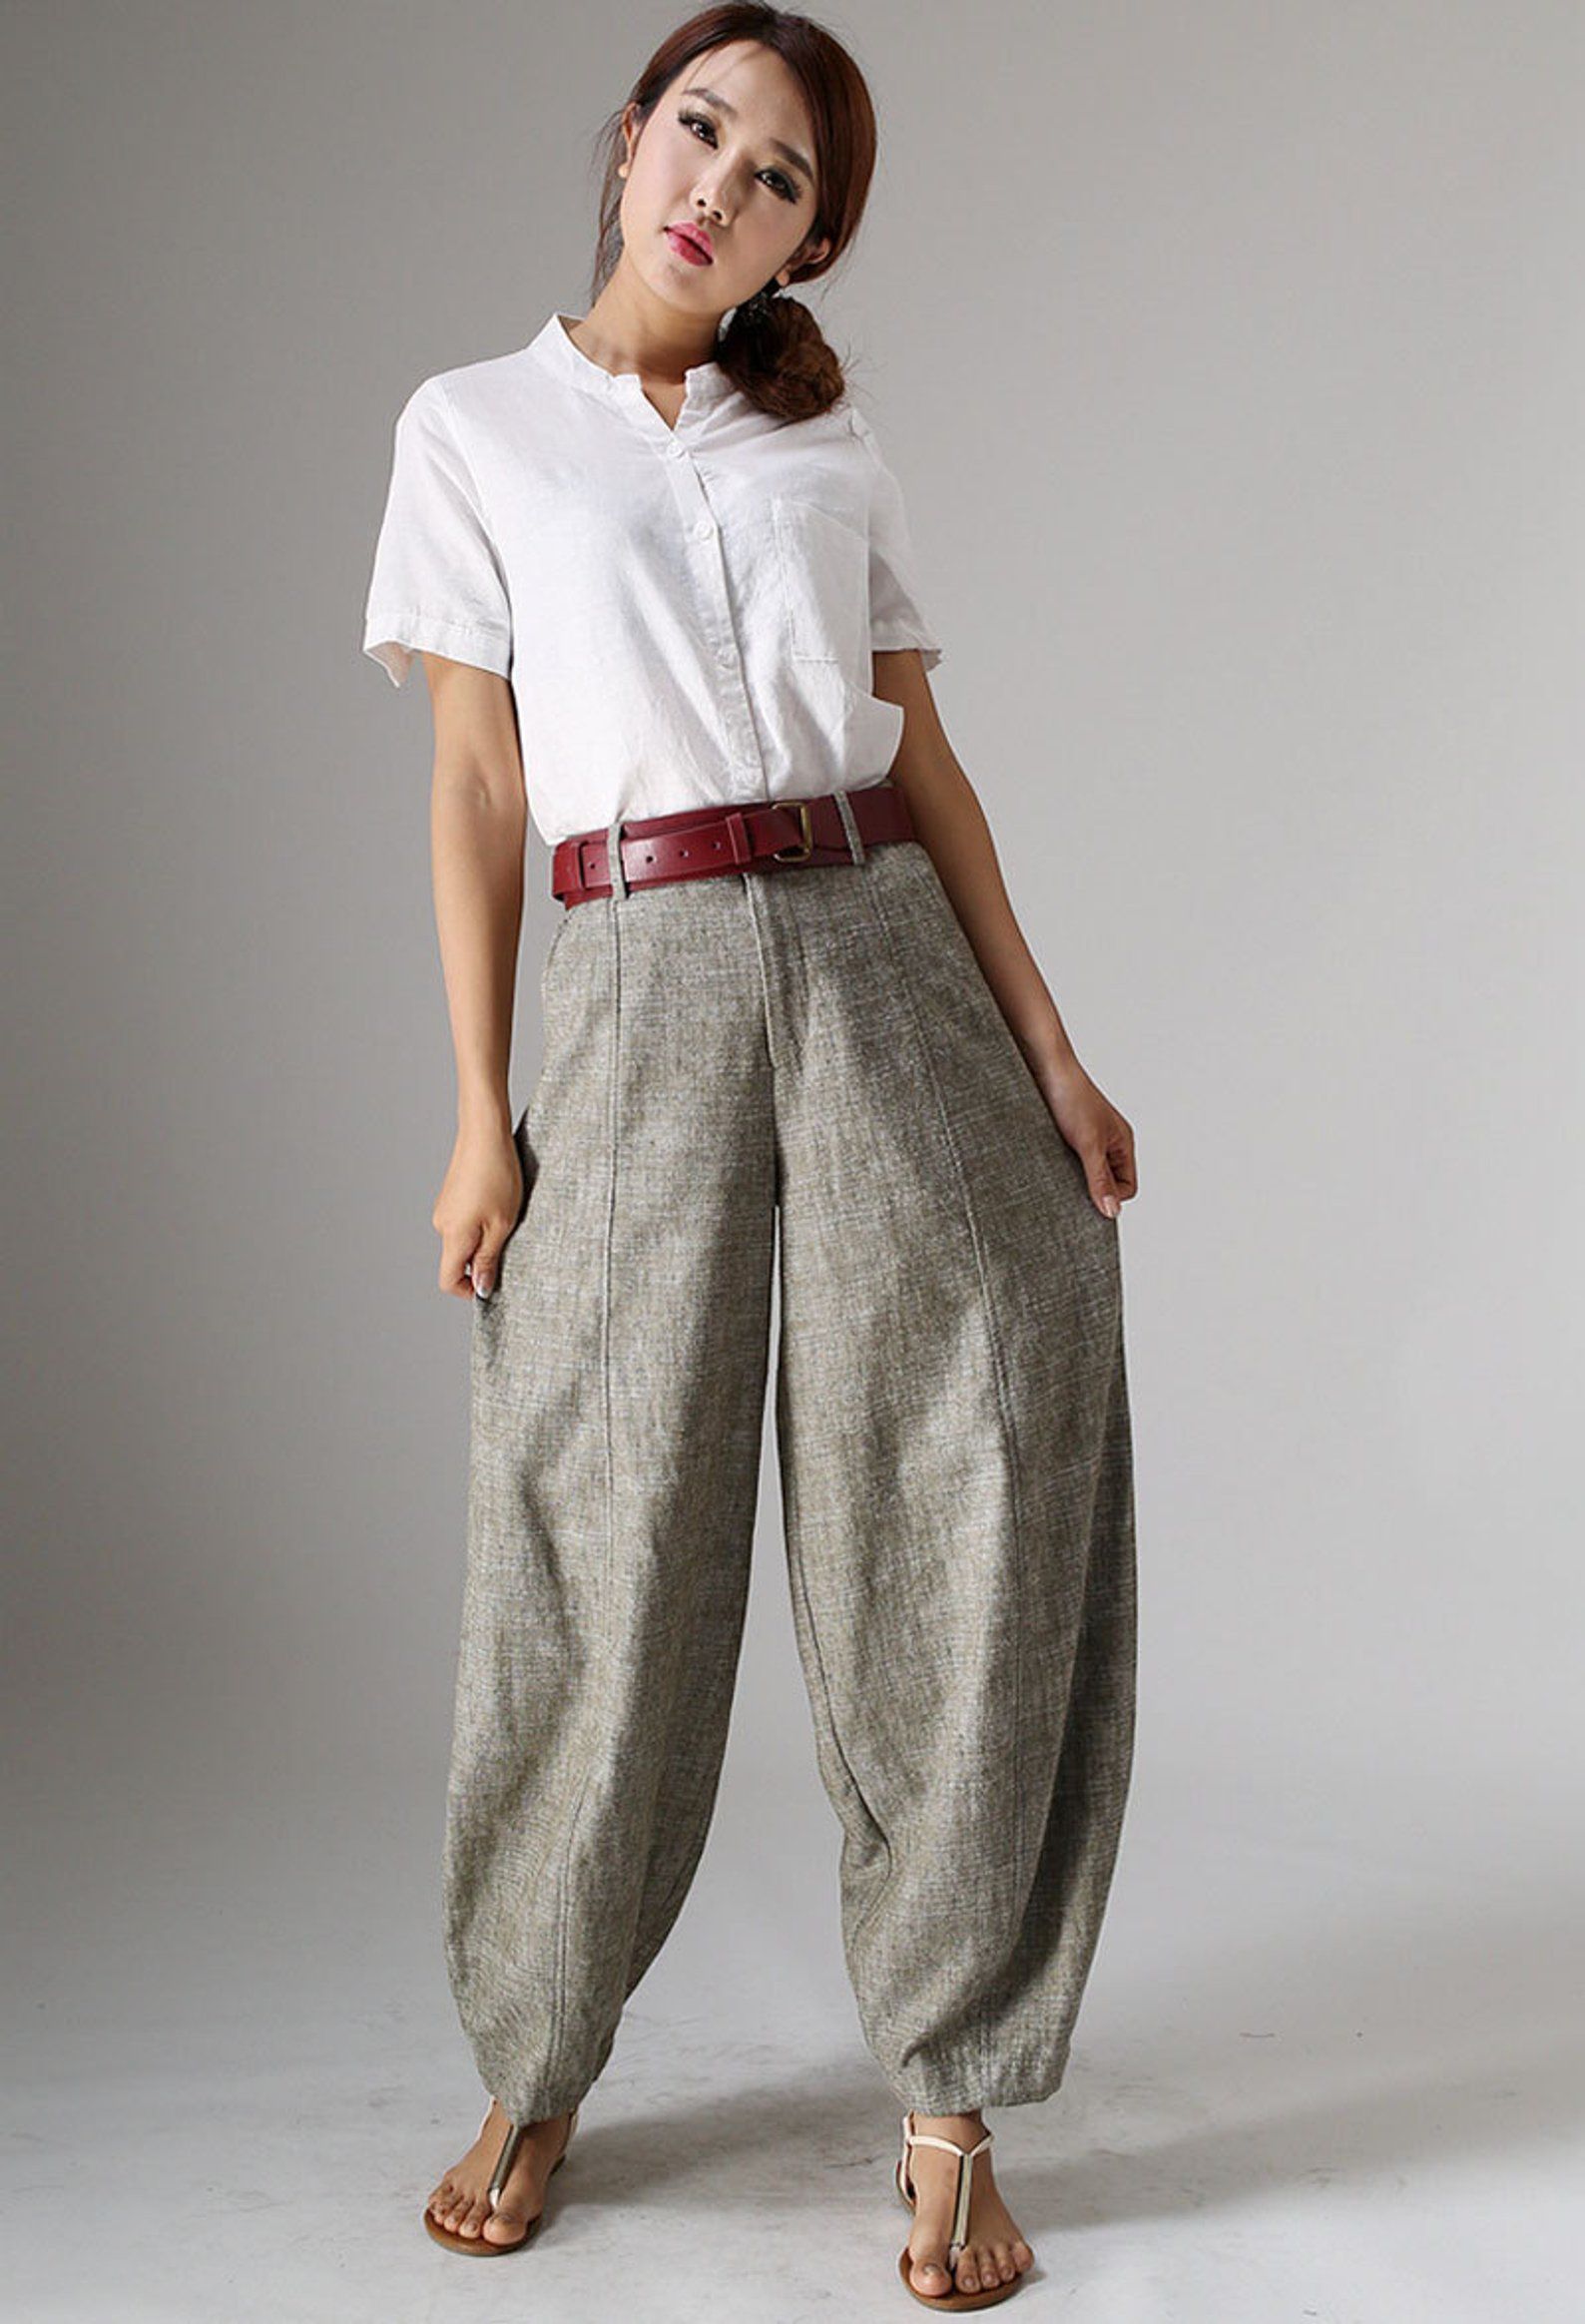 Baggy-pants.-1 60+ Most Fashionable '90s Outfit Ideas For Ladies That Are Coming Back in 2022